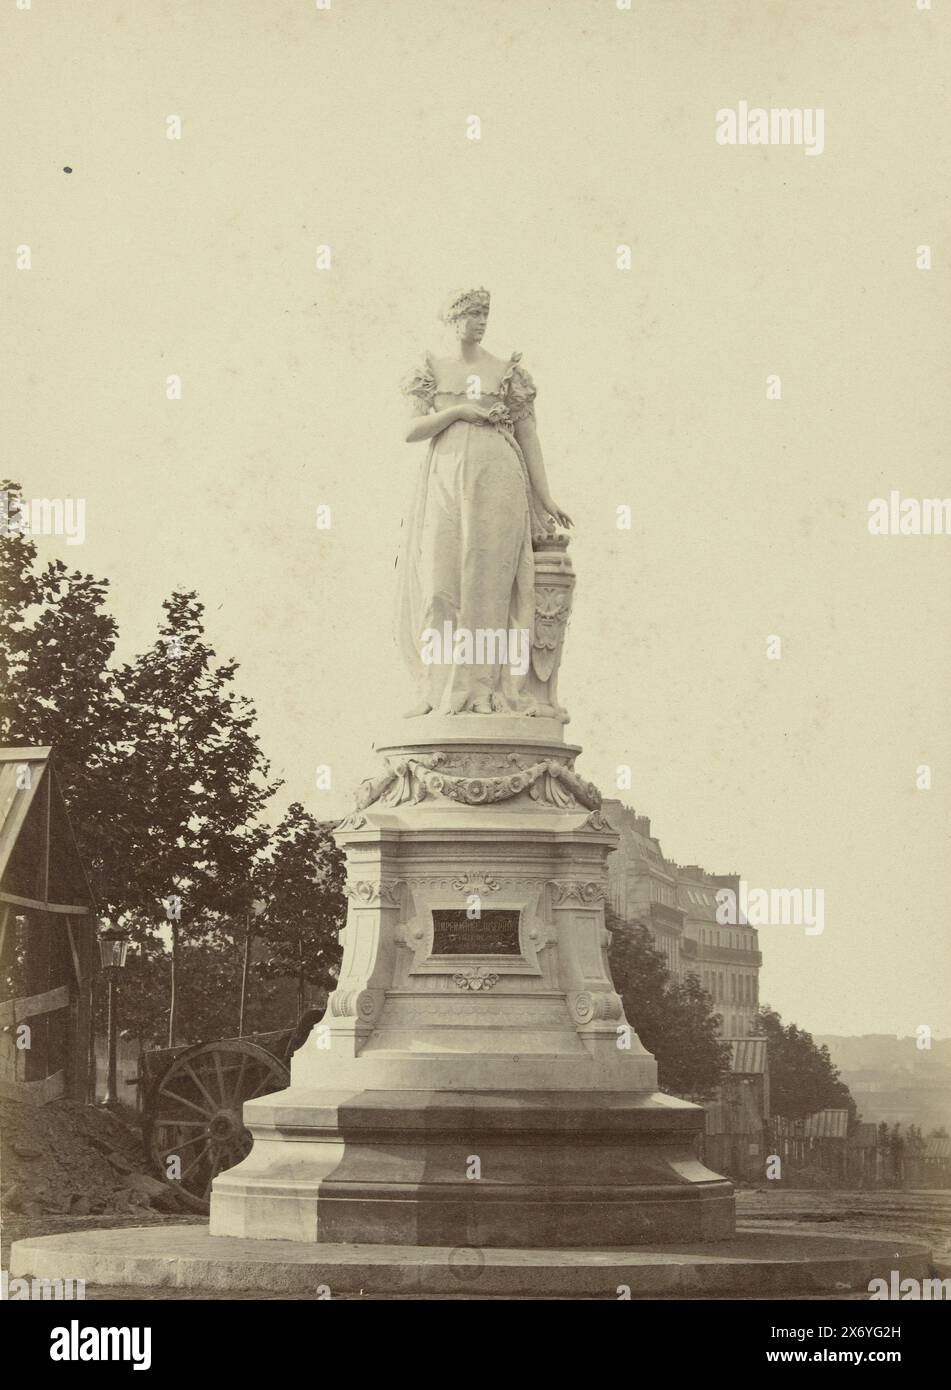 Statue of Joséphine de Beauharnais in Paris, photograph, Albert Mansuy, (mentioned on object), after sculpture by: anonymous, Paris, 1860 - 1880, paper, albumen print, height, 218 mm × width, 155 mm, height, 398 mm × width, 310 mm Stock Photo